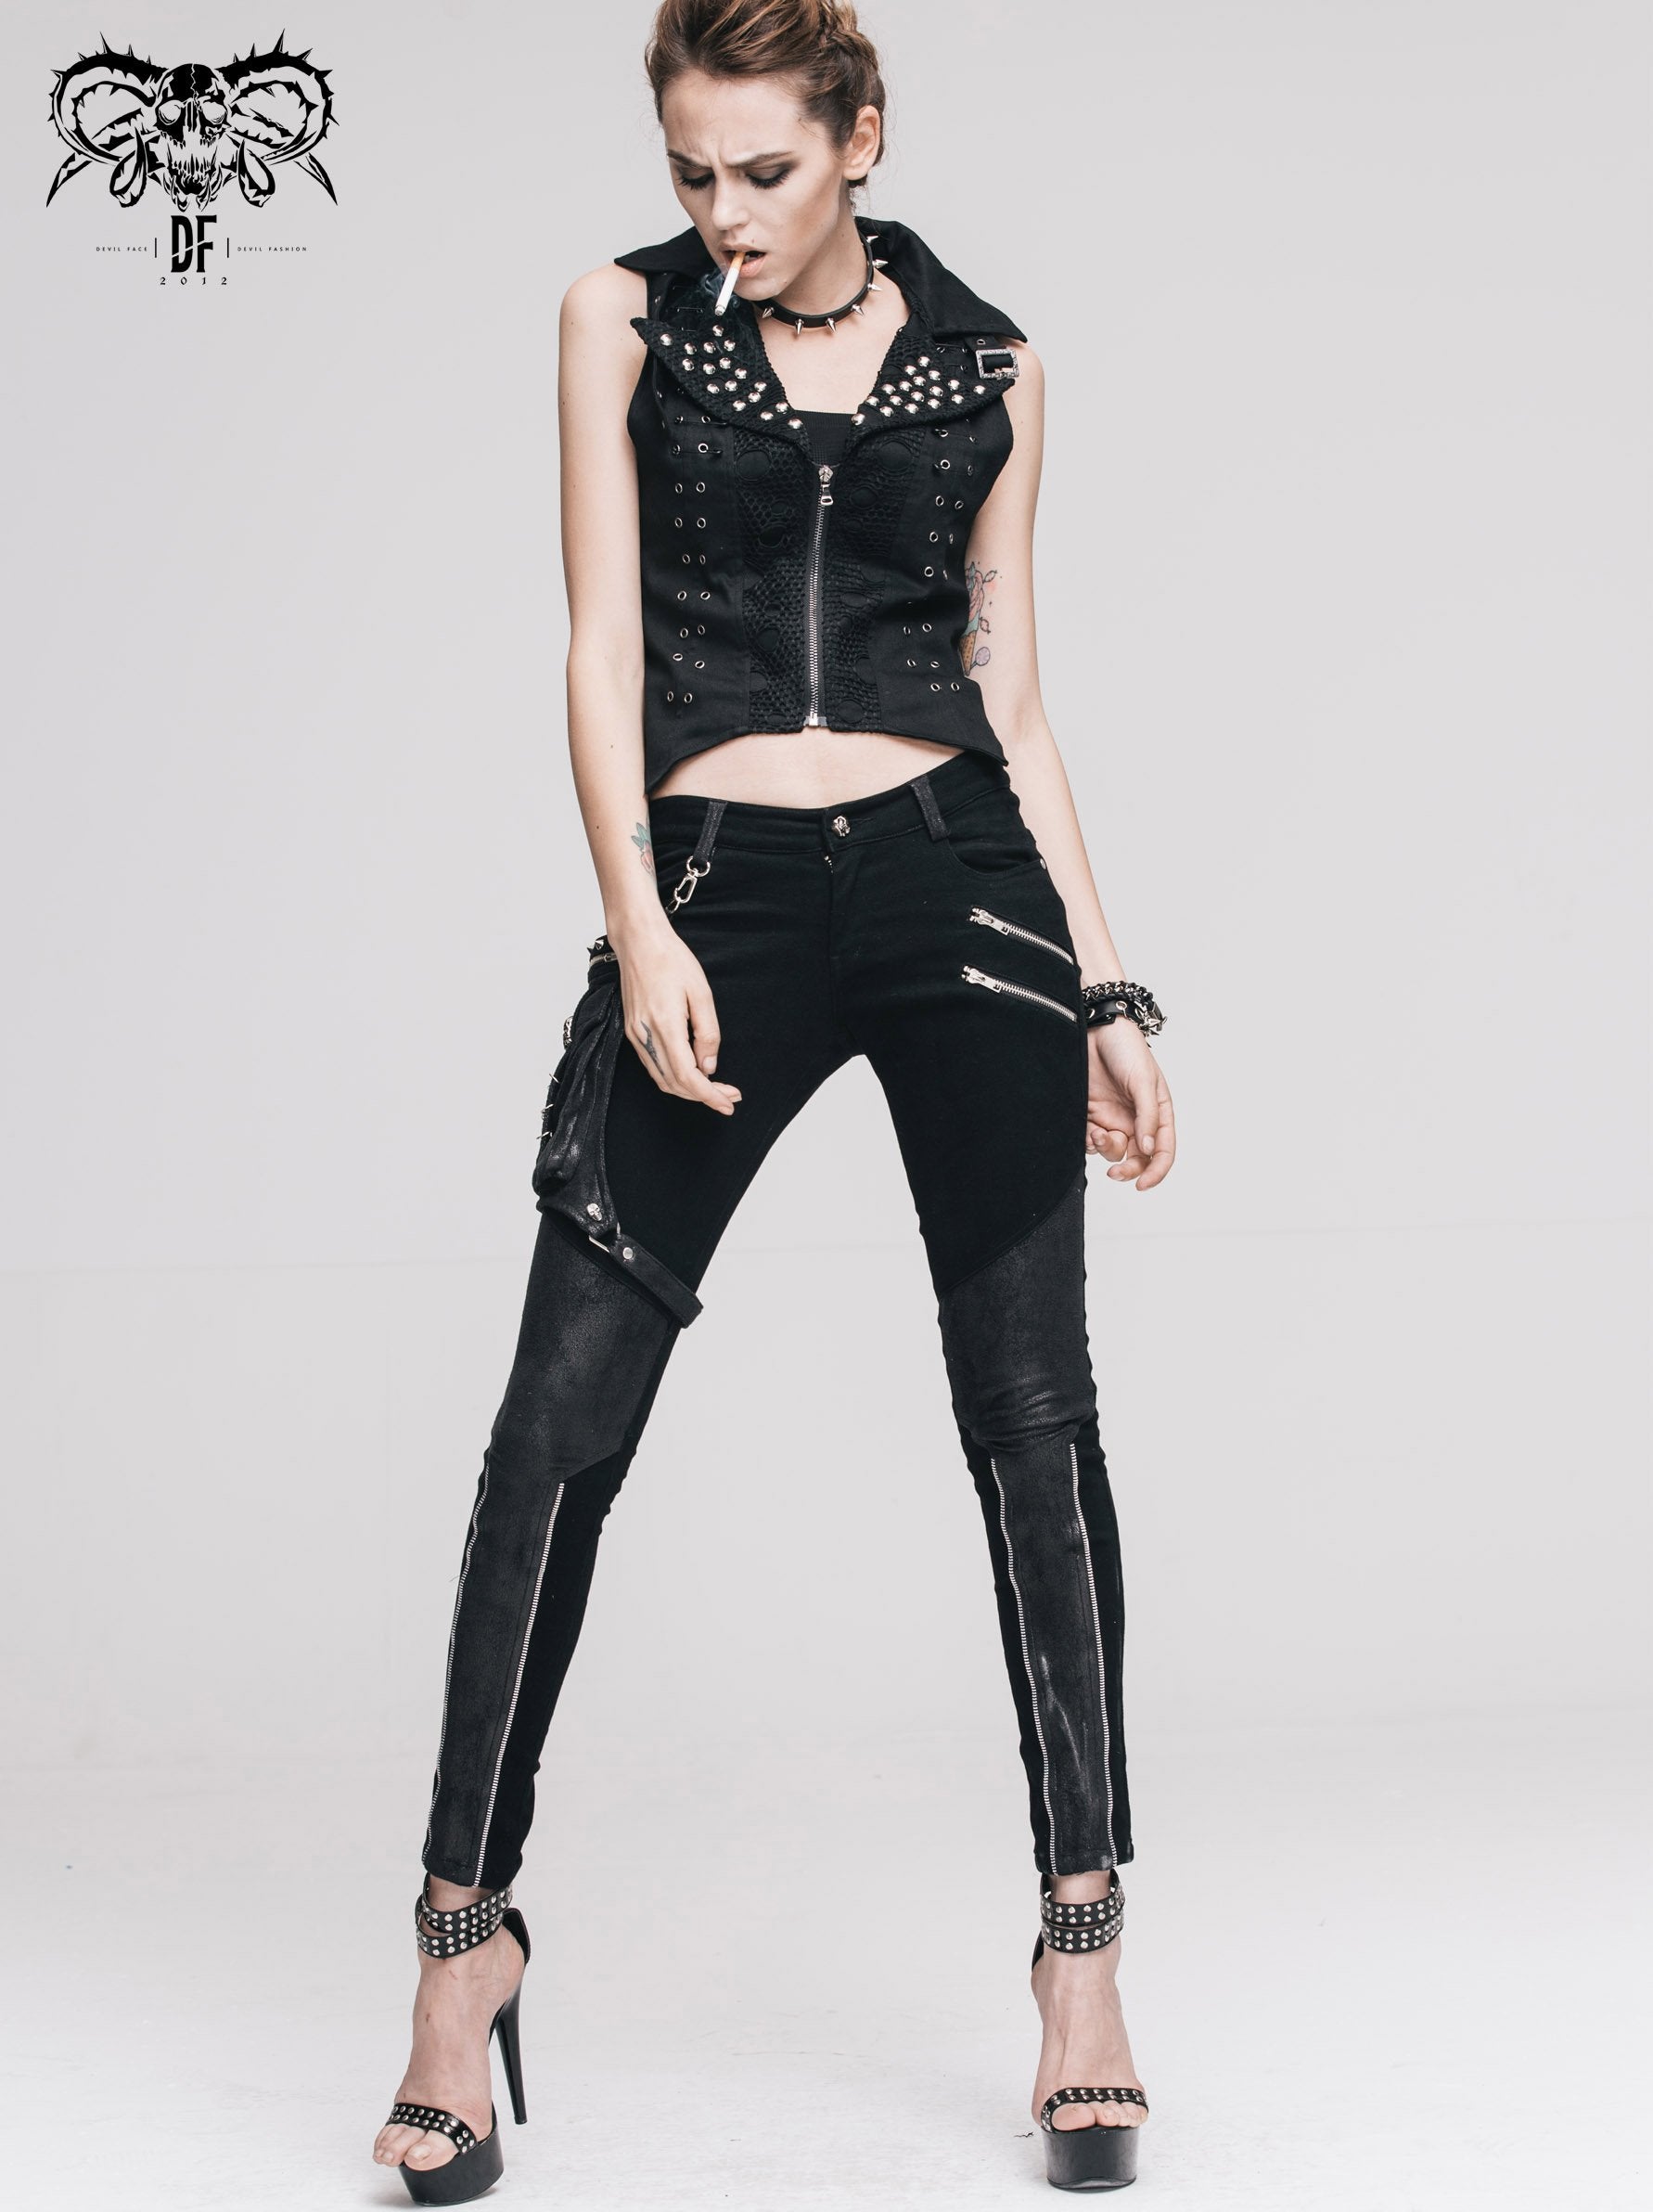 Daily Life Punk Women Black Trousers With Leg Bag 1